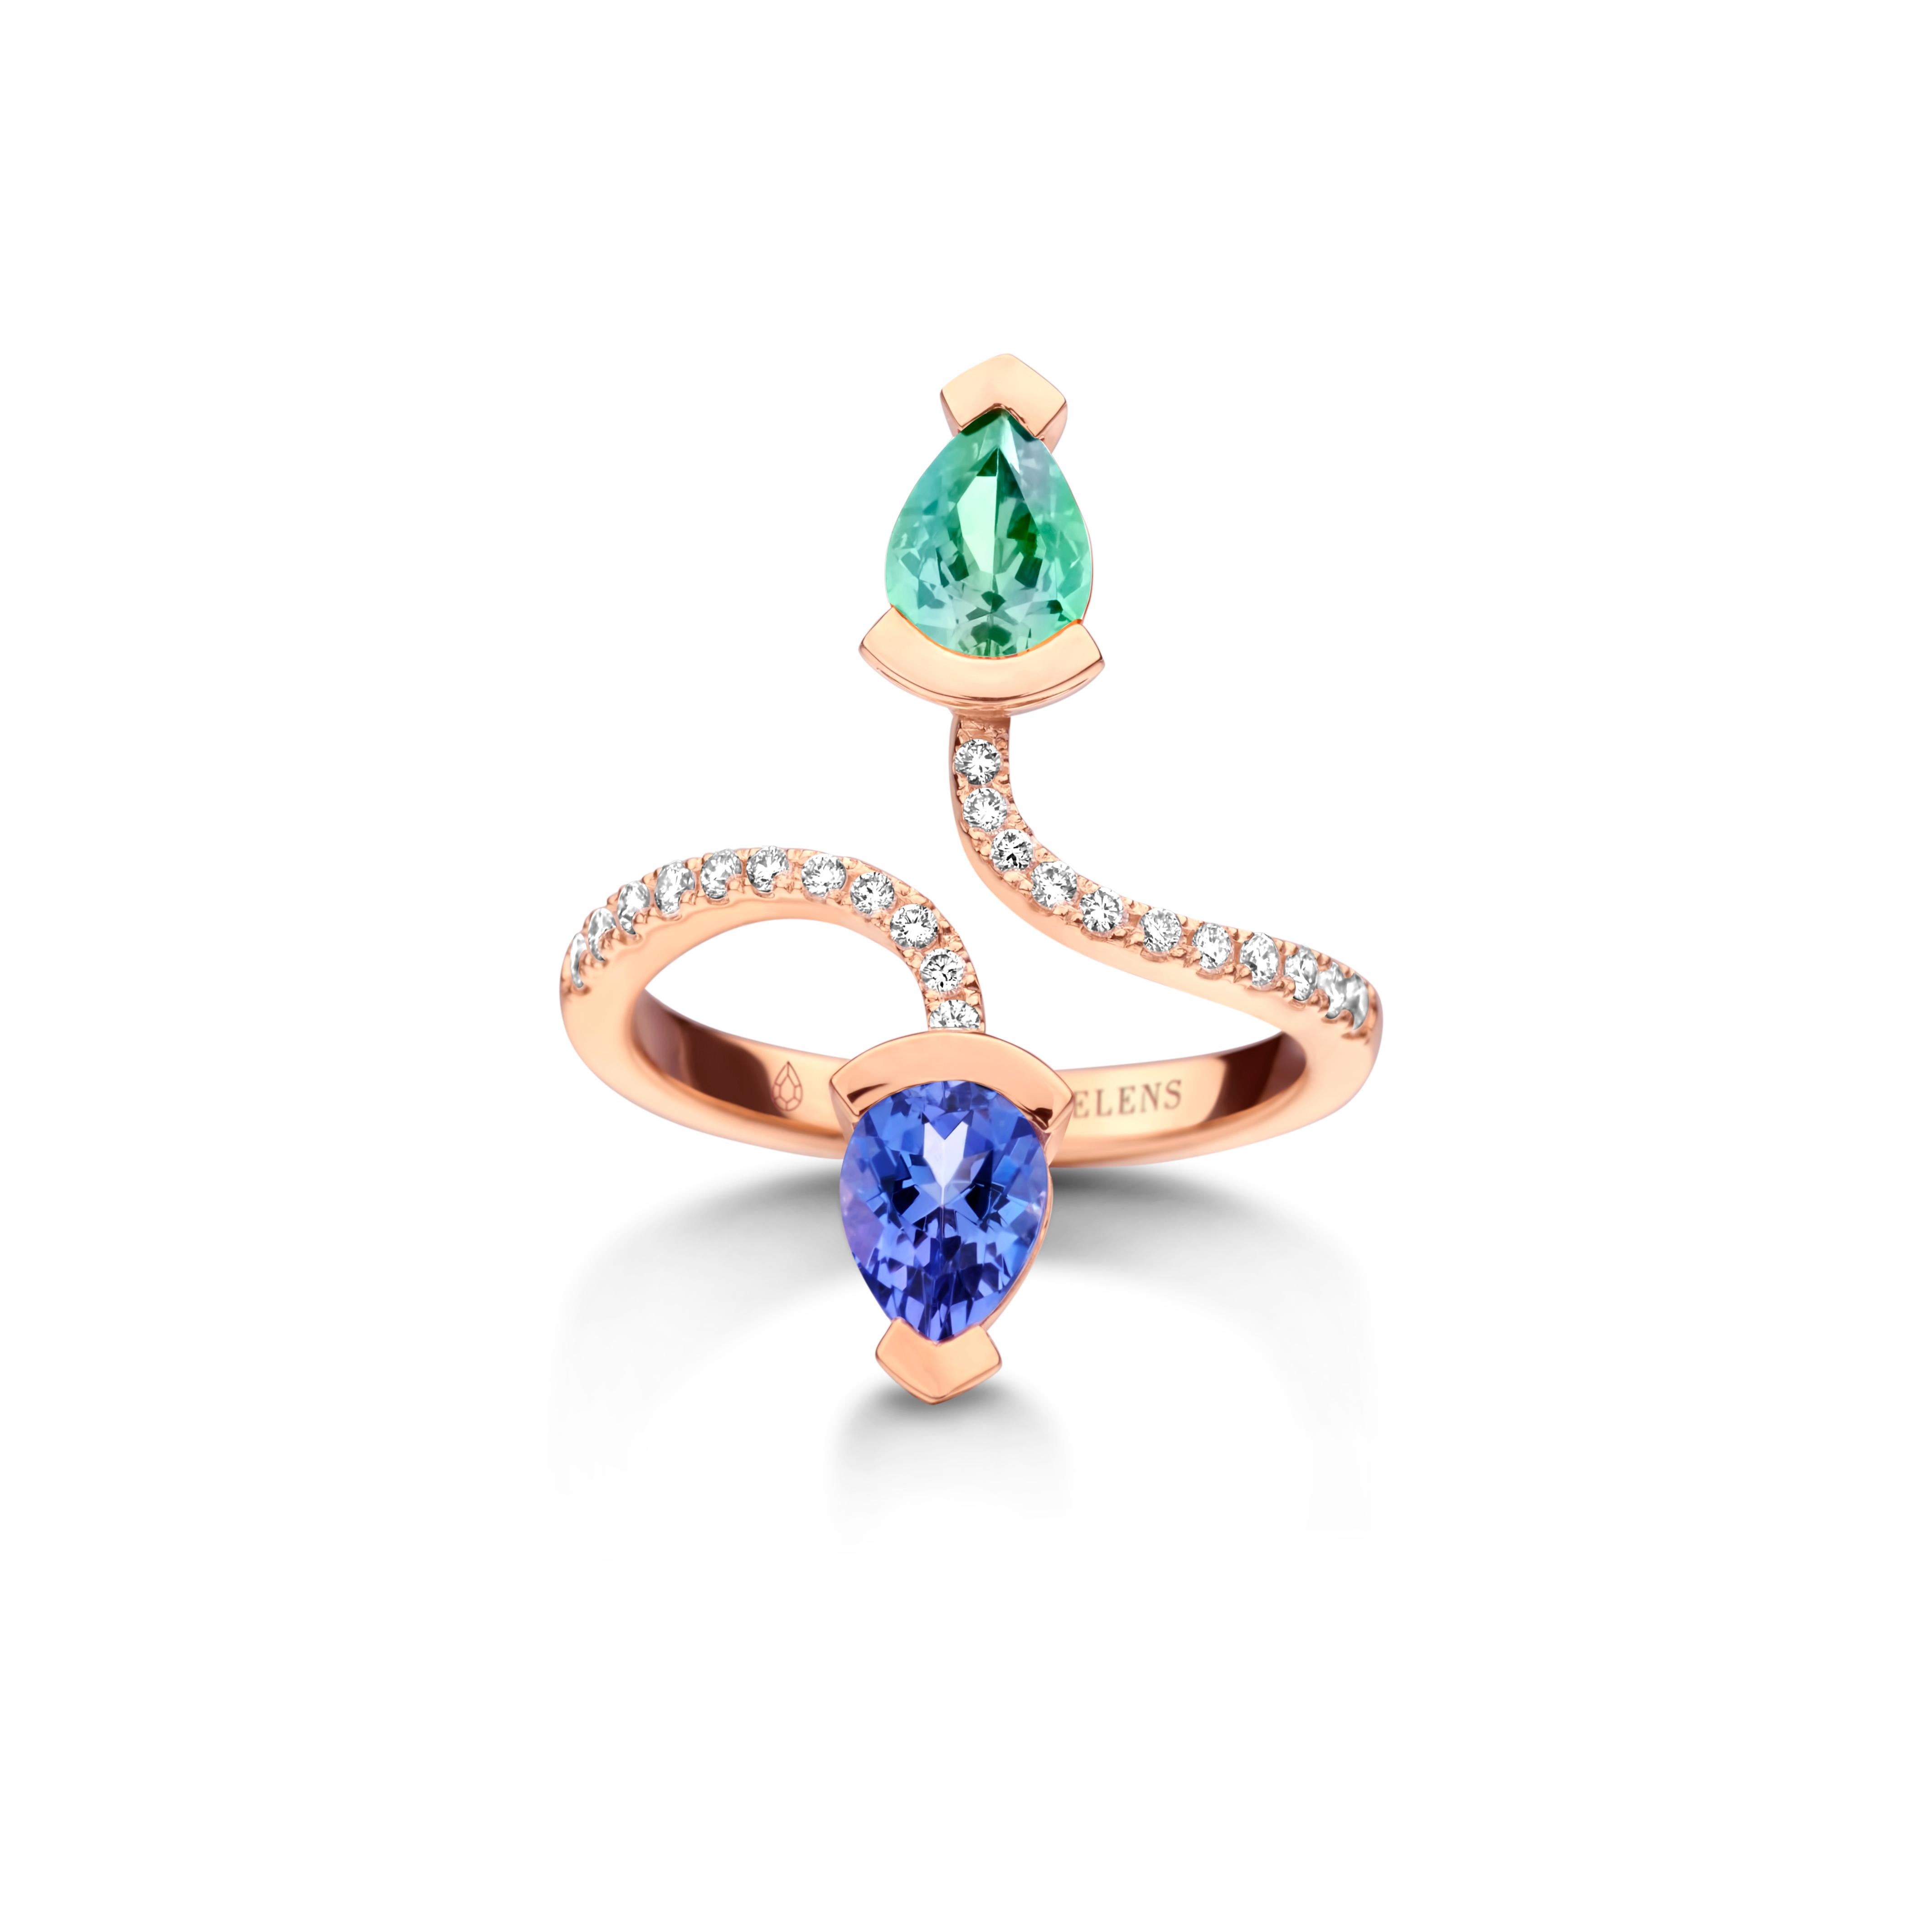 Adeline Duo ring in 18Kt yellow gold 5g set with a pear-shaped mint tourmaline 0,70 Ct, a pear-shaped Tanzanite 0,70 Ct and 0,19 Ct of white brilliant cut diamonds - VS F quality. Celine Roelens, a goldsmith and gemologist, is specialized in unique,